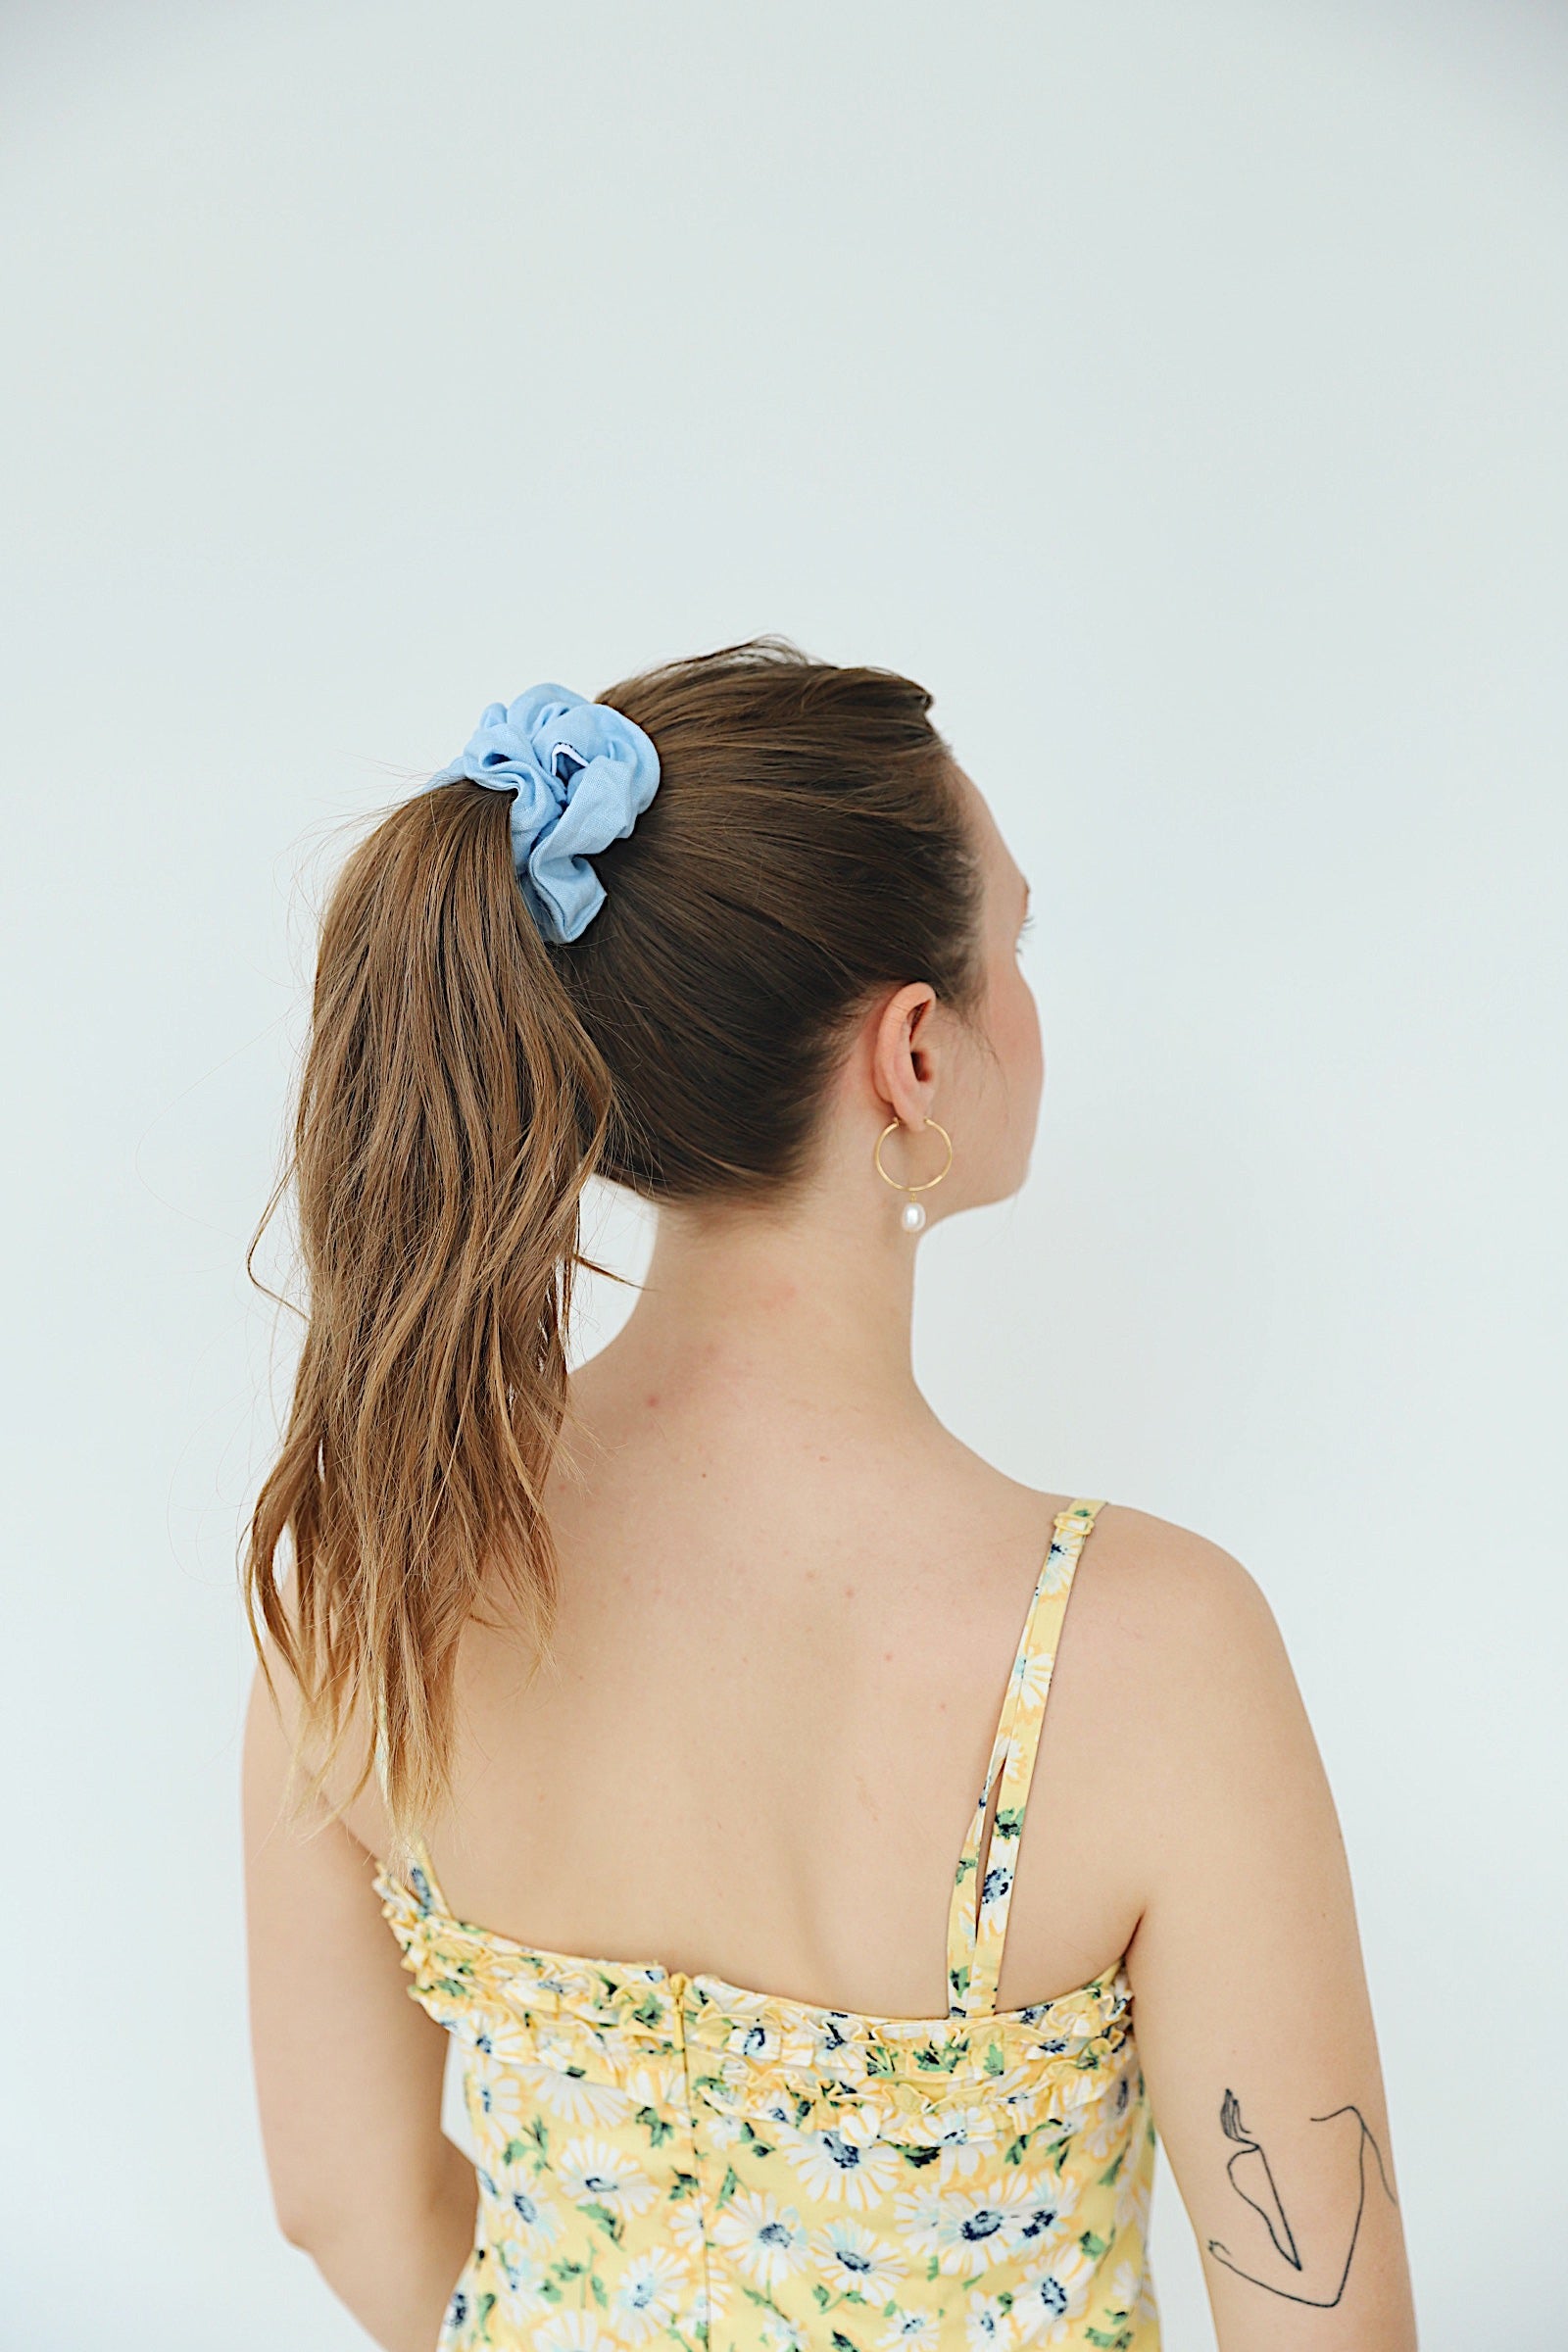 Baby Blue Linen Scrunchie in Classic size in model's ponytail